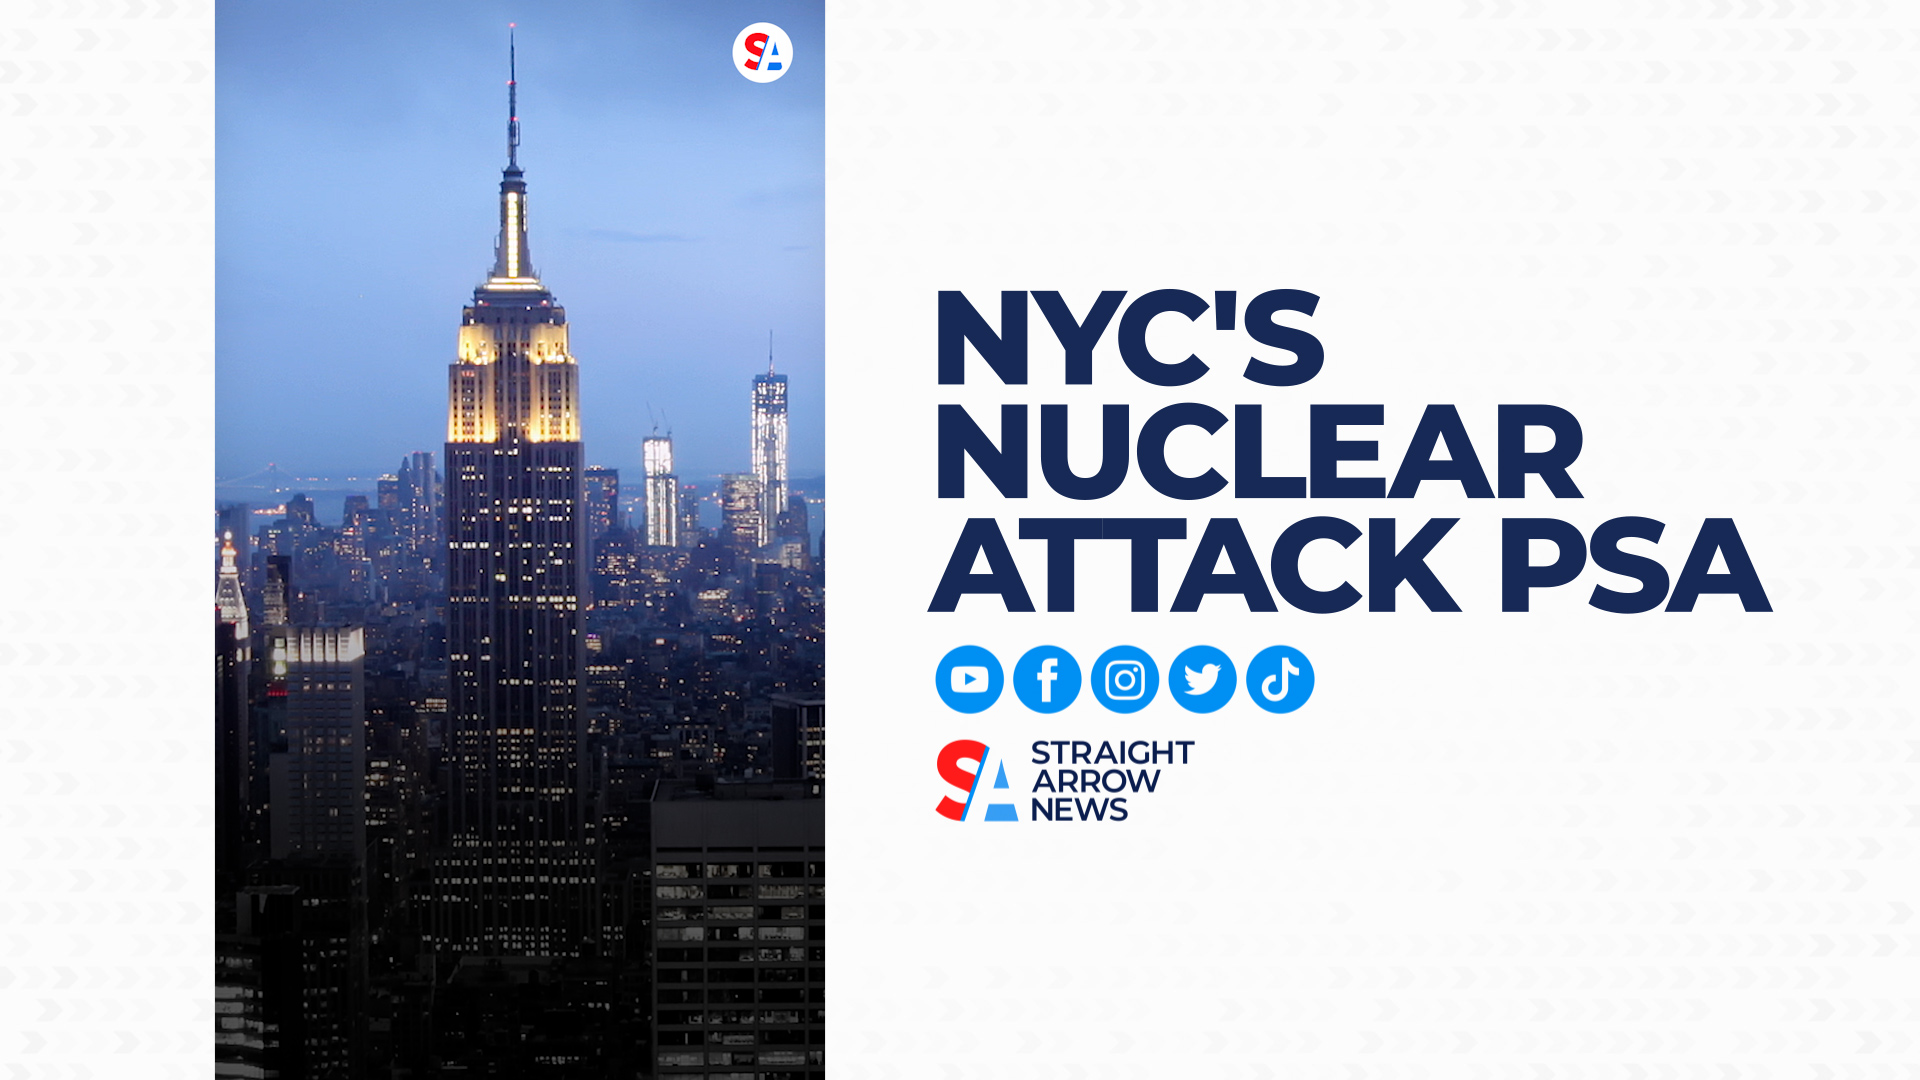 New York City's emergency management department released a PSA advising citizens on what to do in the event of a nuclear attack.